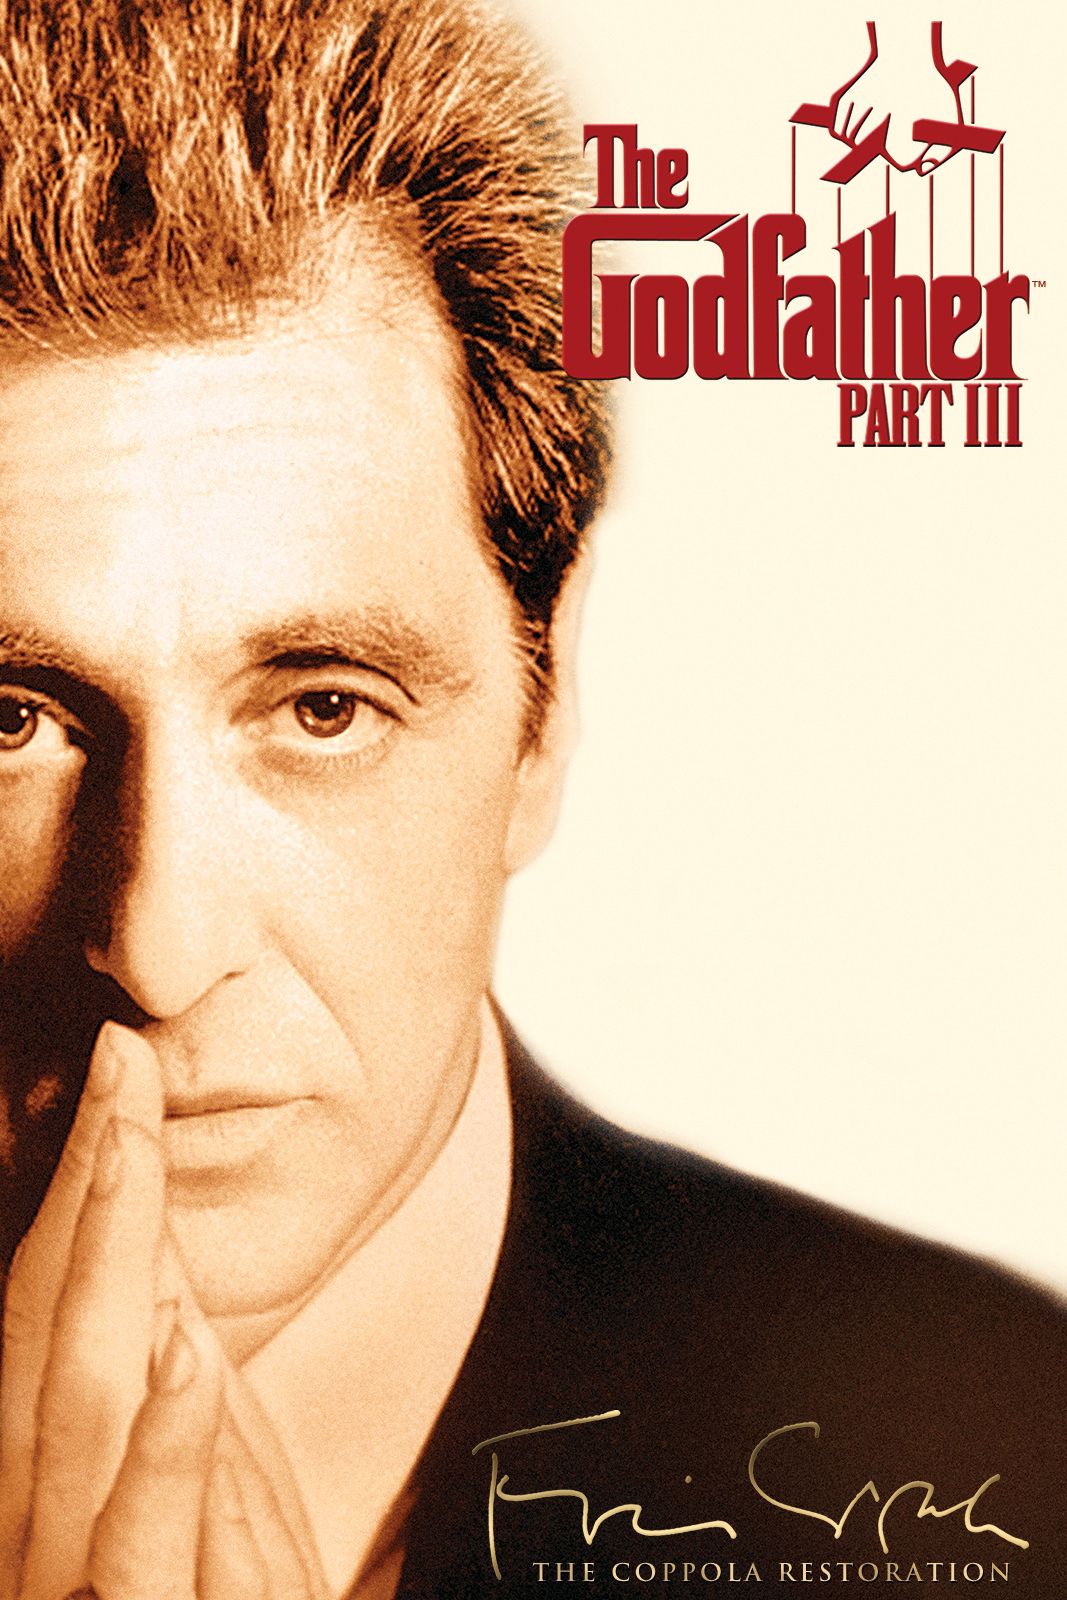 The Godfather Part III Movie Poster